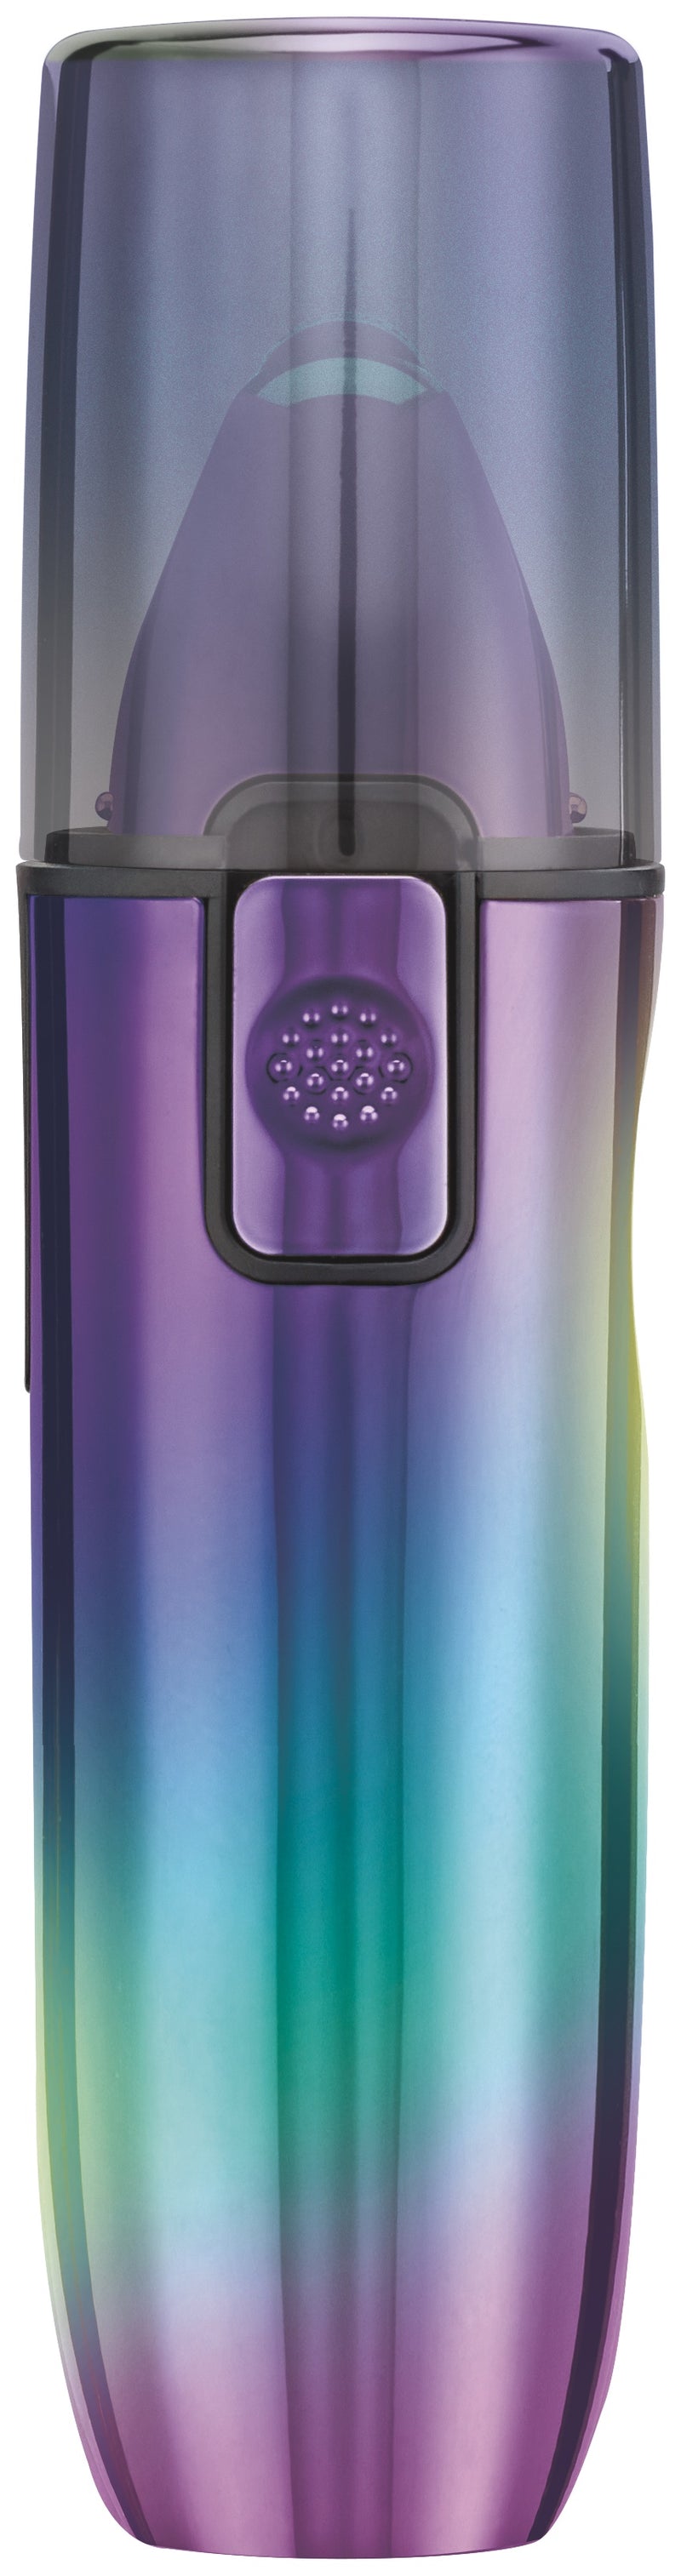 BaBylissPRO Limited Edition Iridescent UV-Disinfecting Single-Foil Shaver (FXLFS1RB)